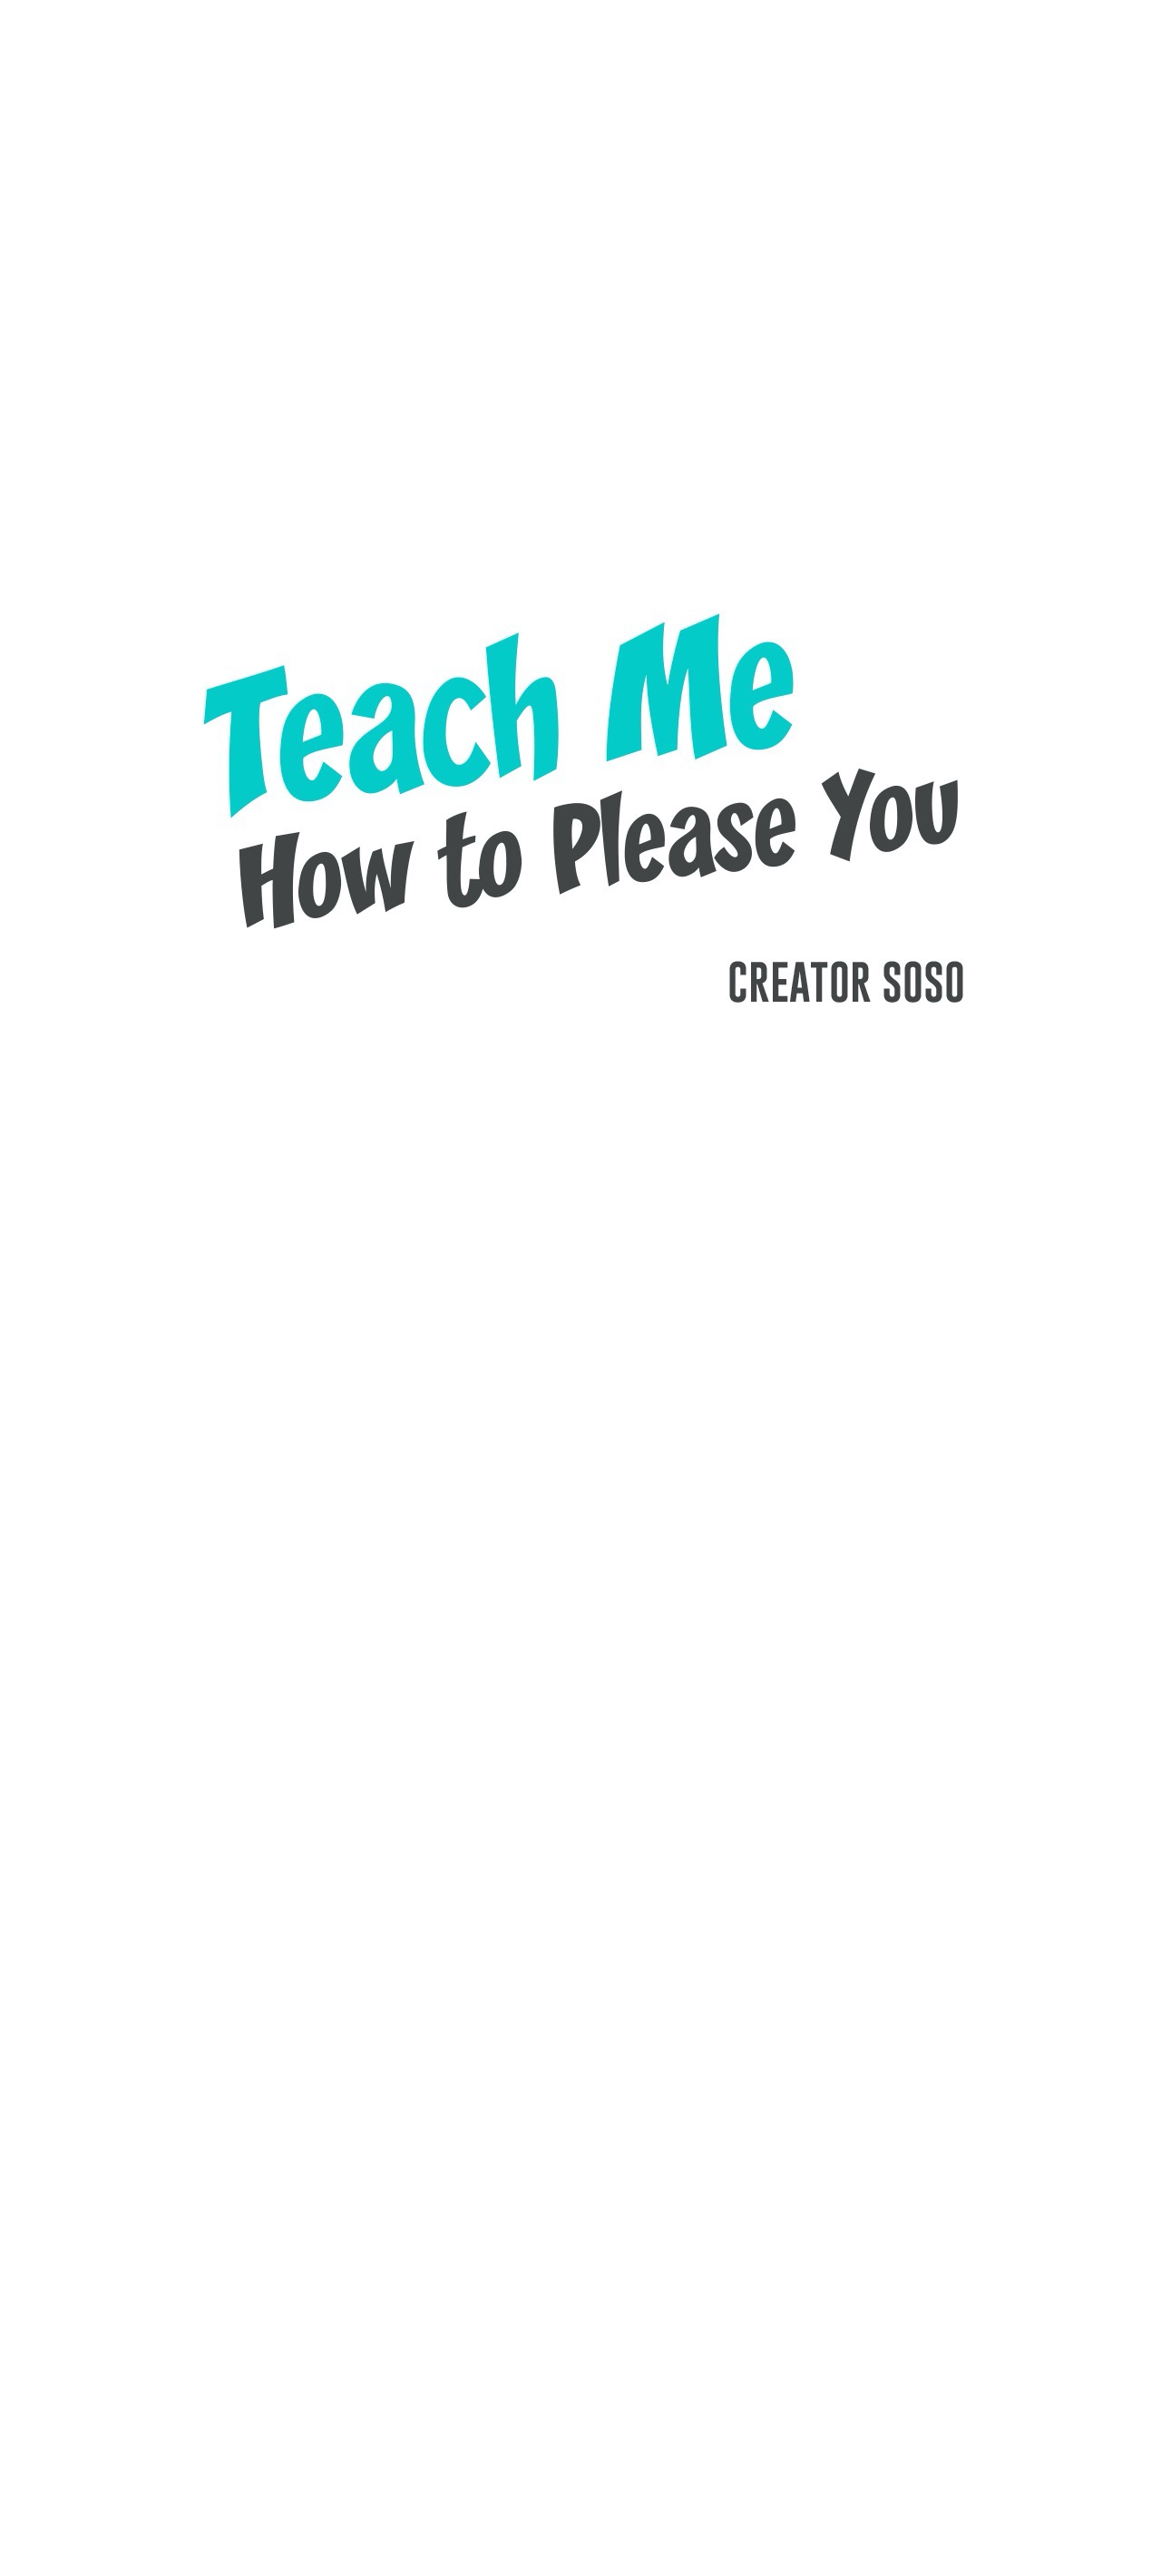 Teach Me How to Please You image